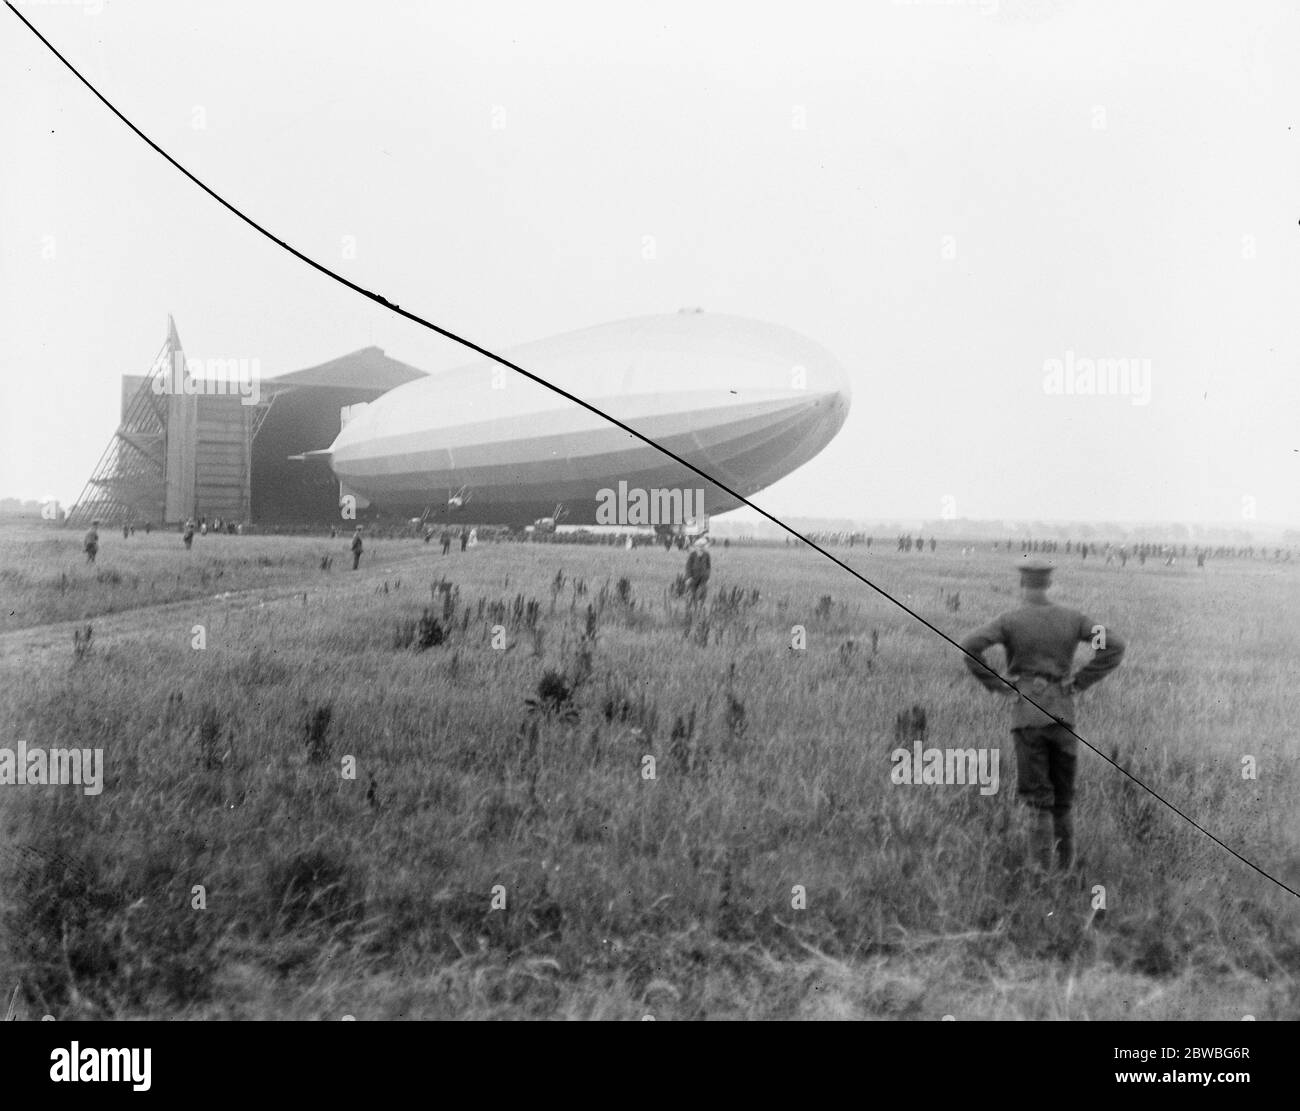 Giant Airship Built for the American Navy Makes its First Flight The Airship R 38 built at Cardington Aerodrome for the United States Navy rose from the Aerodrome about 10 o ' clock last evening and cruised over Bedford and away to the North East 24 June 1921 Stock Photo